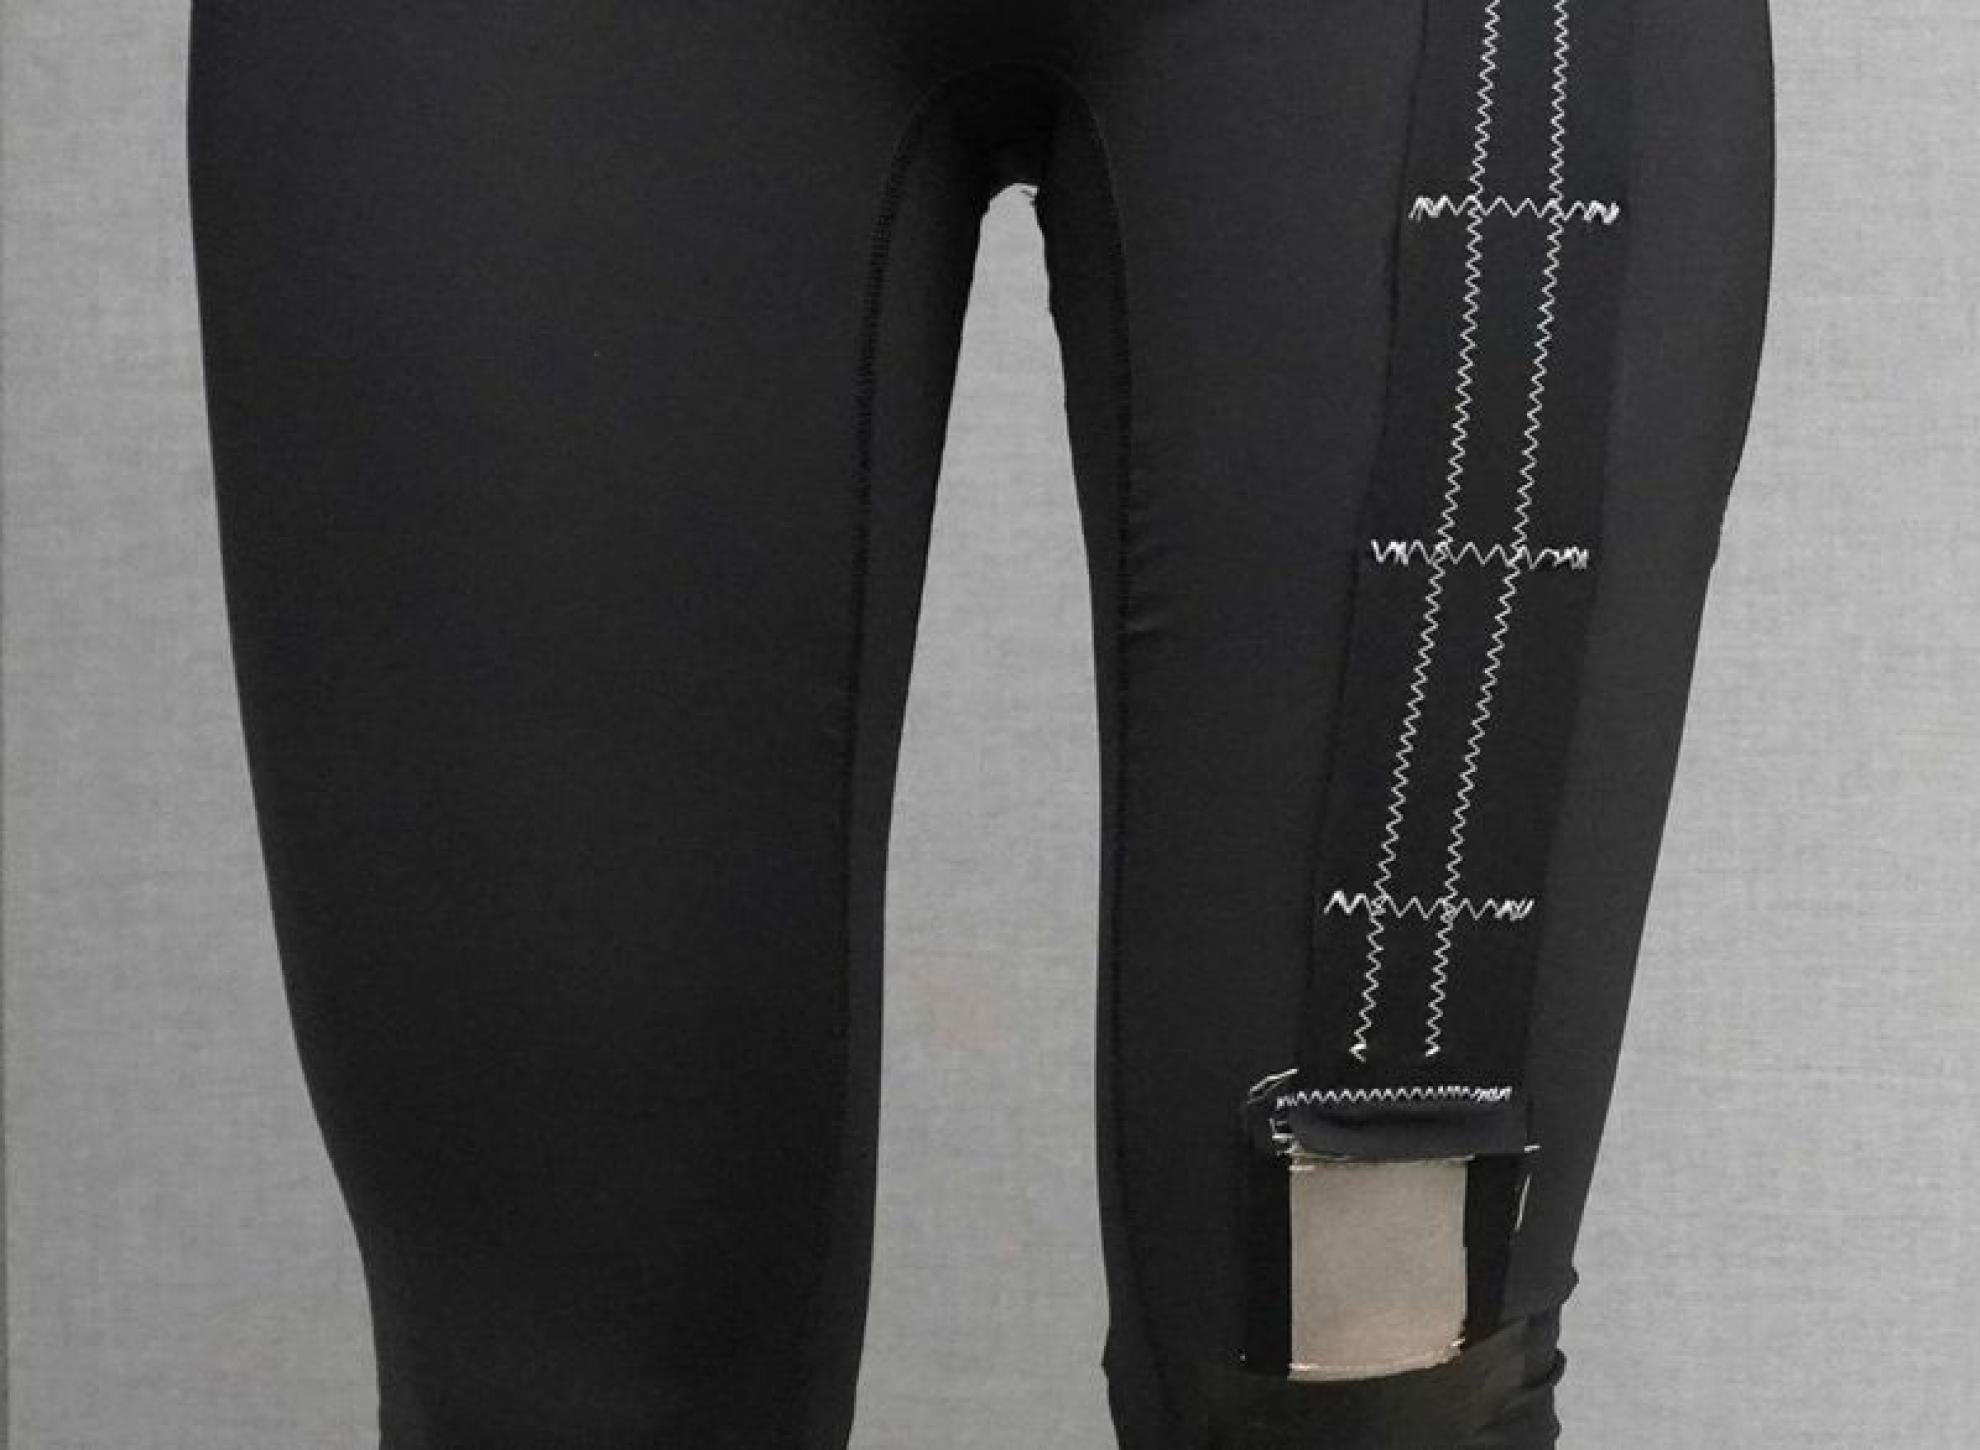 The textile sensor above the knee is connected to an antenna embedded in the waistband. Together they form a circuit that can be used to measure movement. (Photograph: Valeria Galli / ETH Zurich)